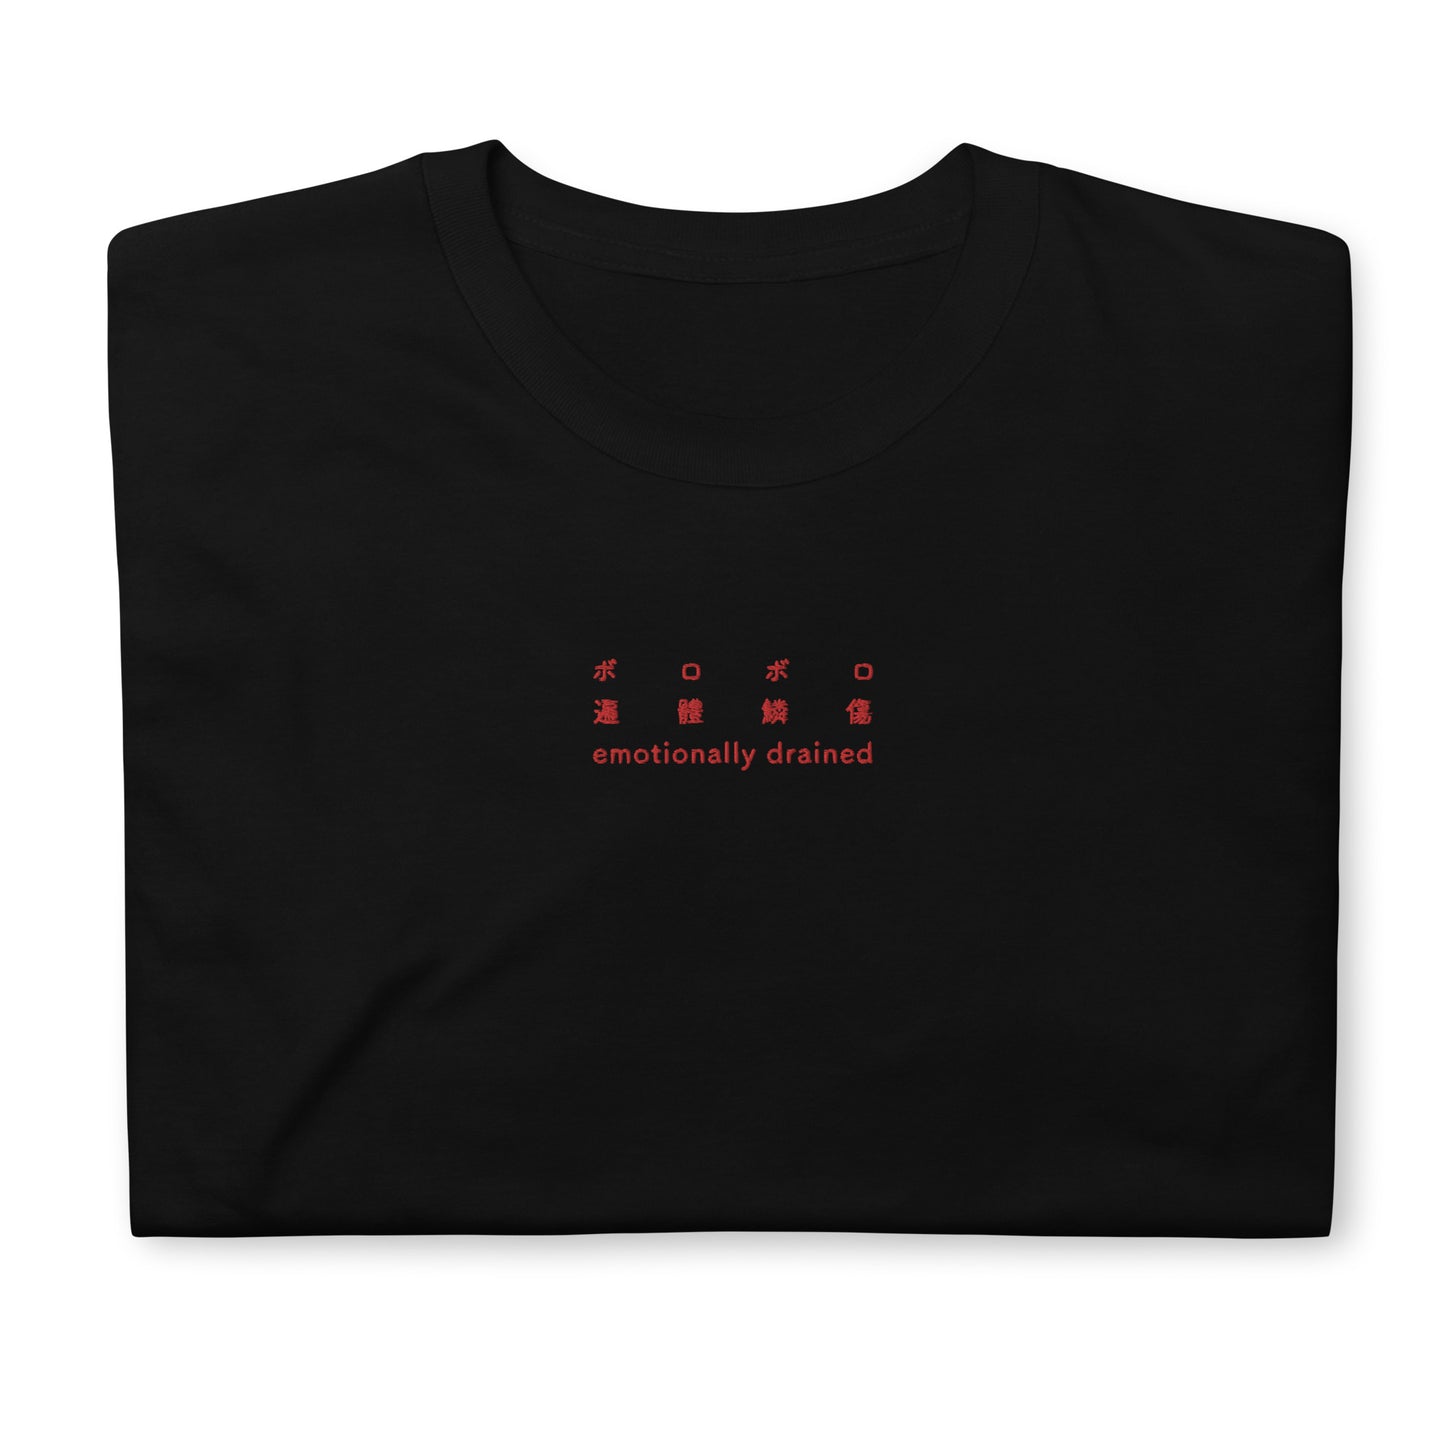 Black High Quality Tee - Front Design with an Red Embroidery "emotionally drained" in three languages